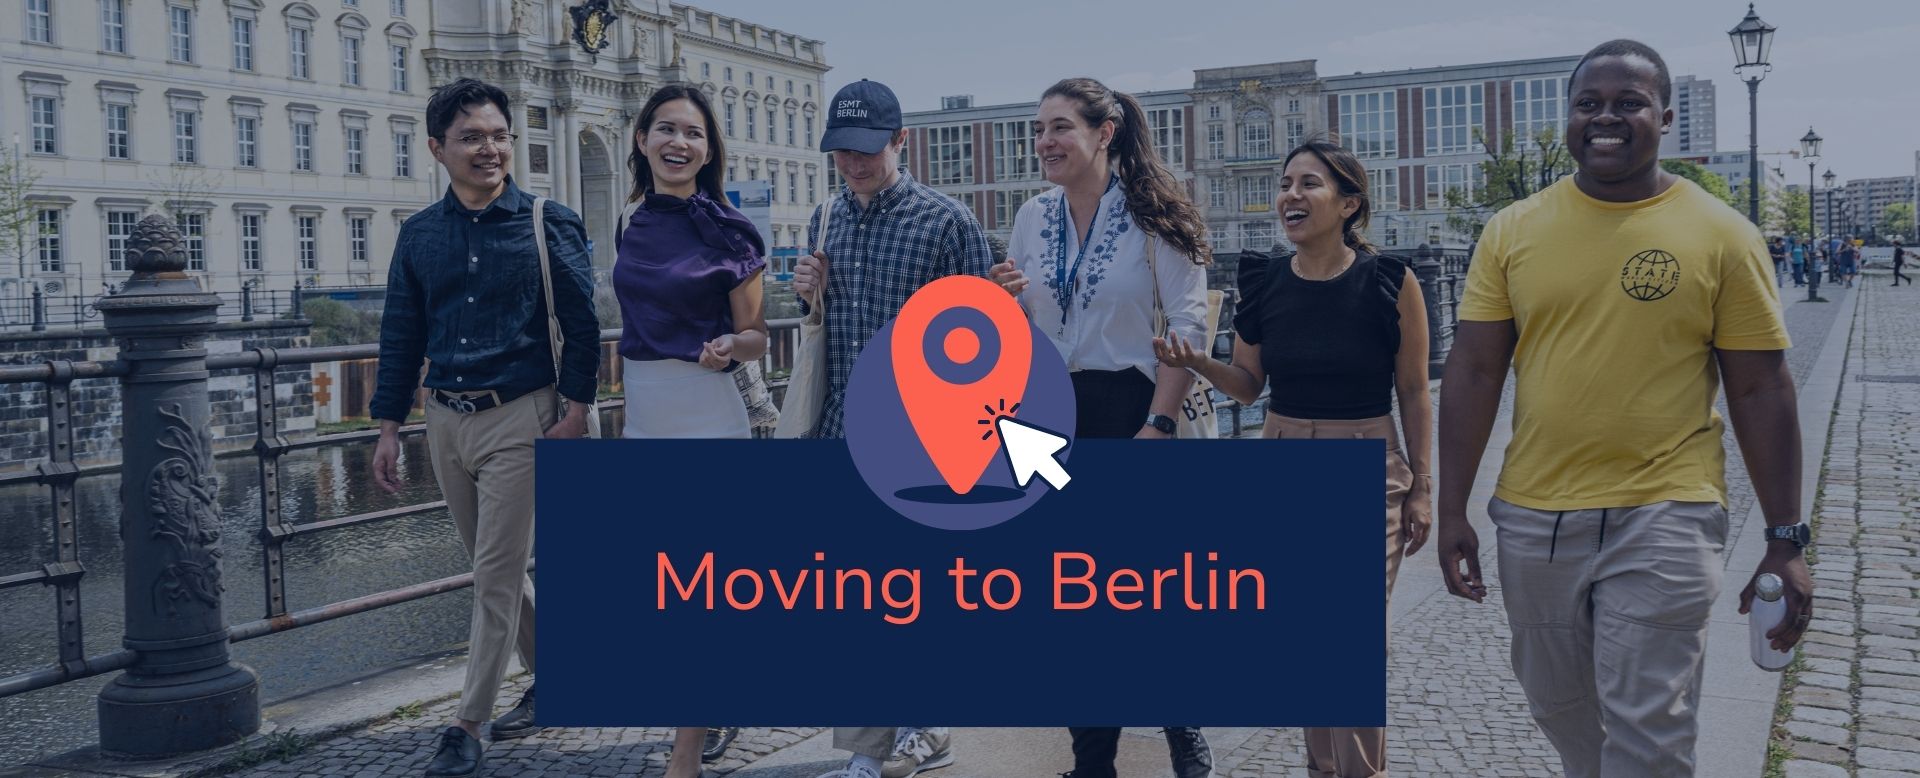 moving to Berlin image link